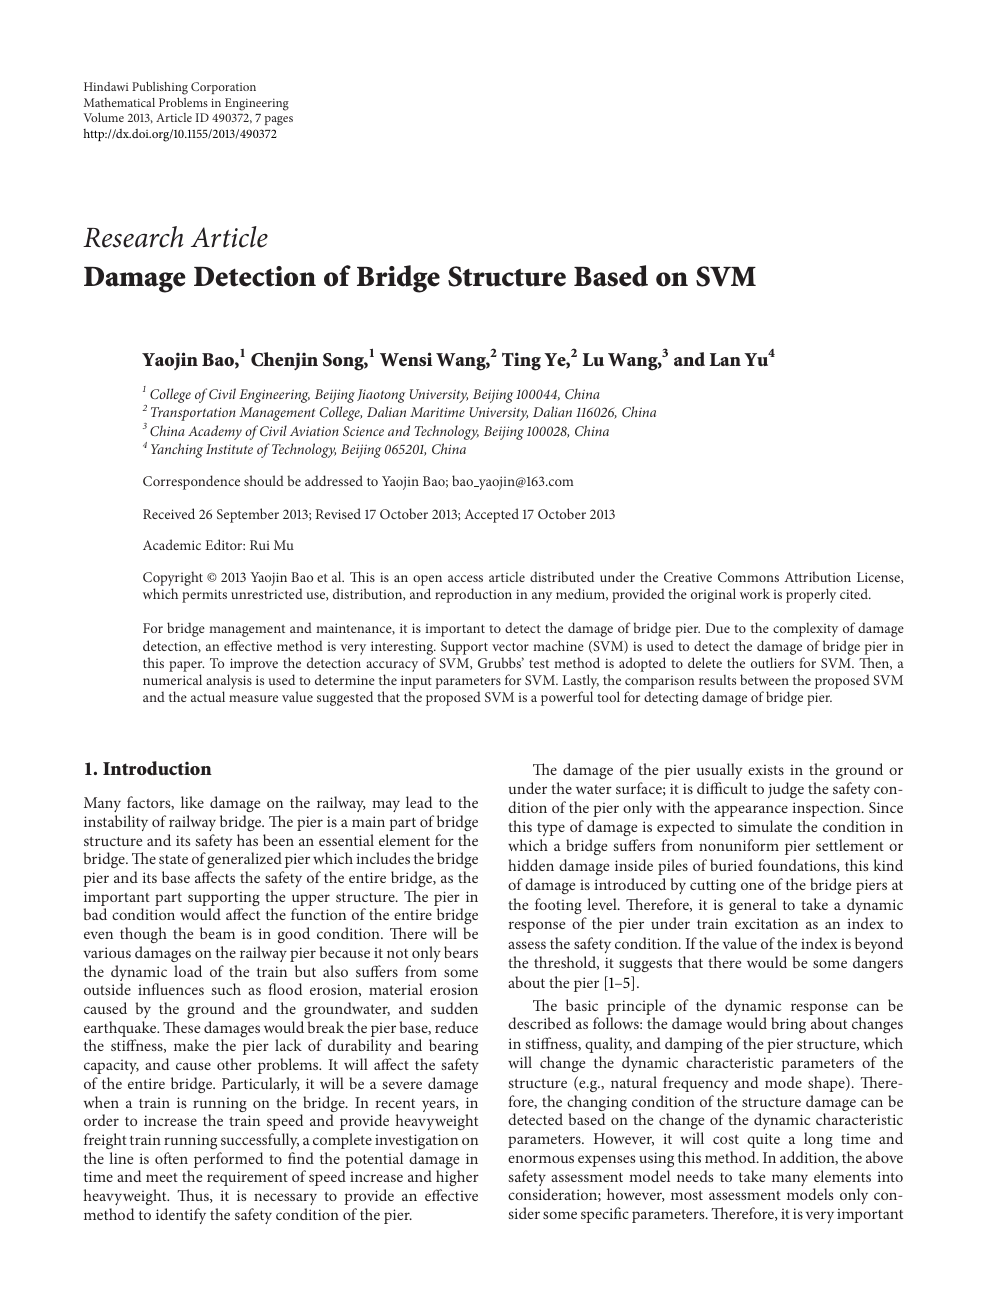 Damage Detection Of Bridge Structure Based On Svm Topic Of Research Paper In Mechanical Engineering Download Scholarly Article Pdf And Read For Free On Cyberleninka Open Science Hub